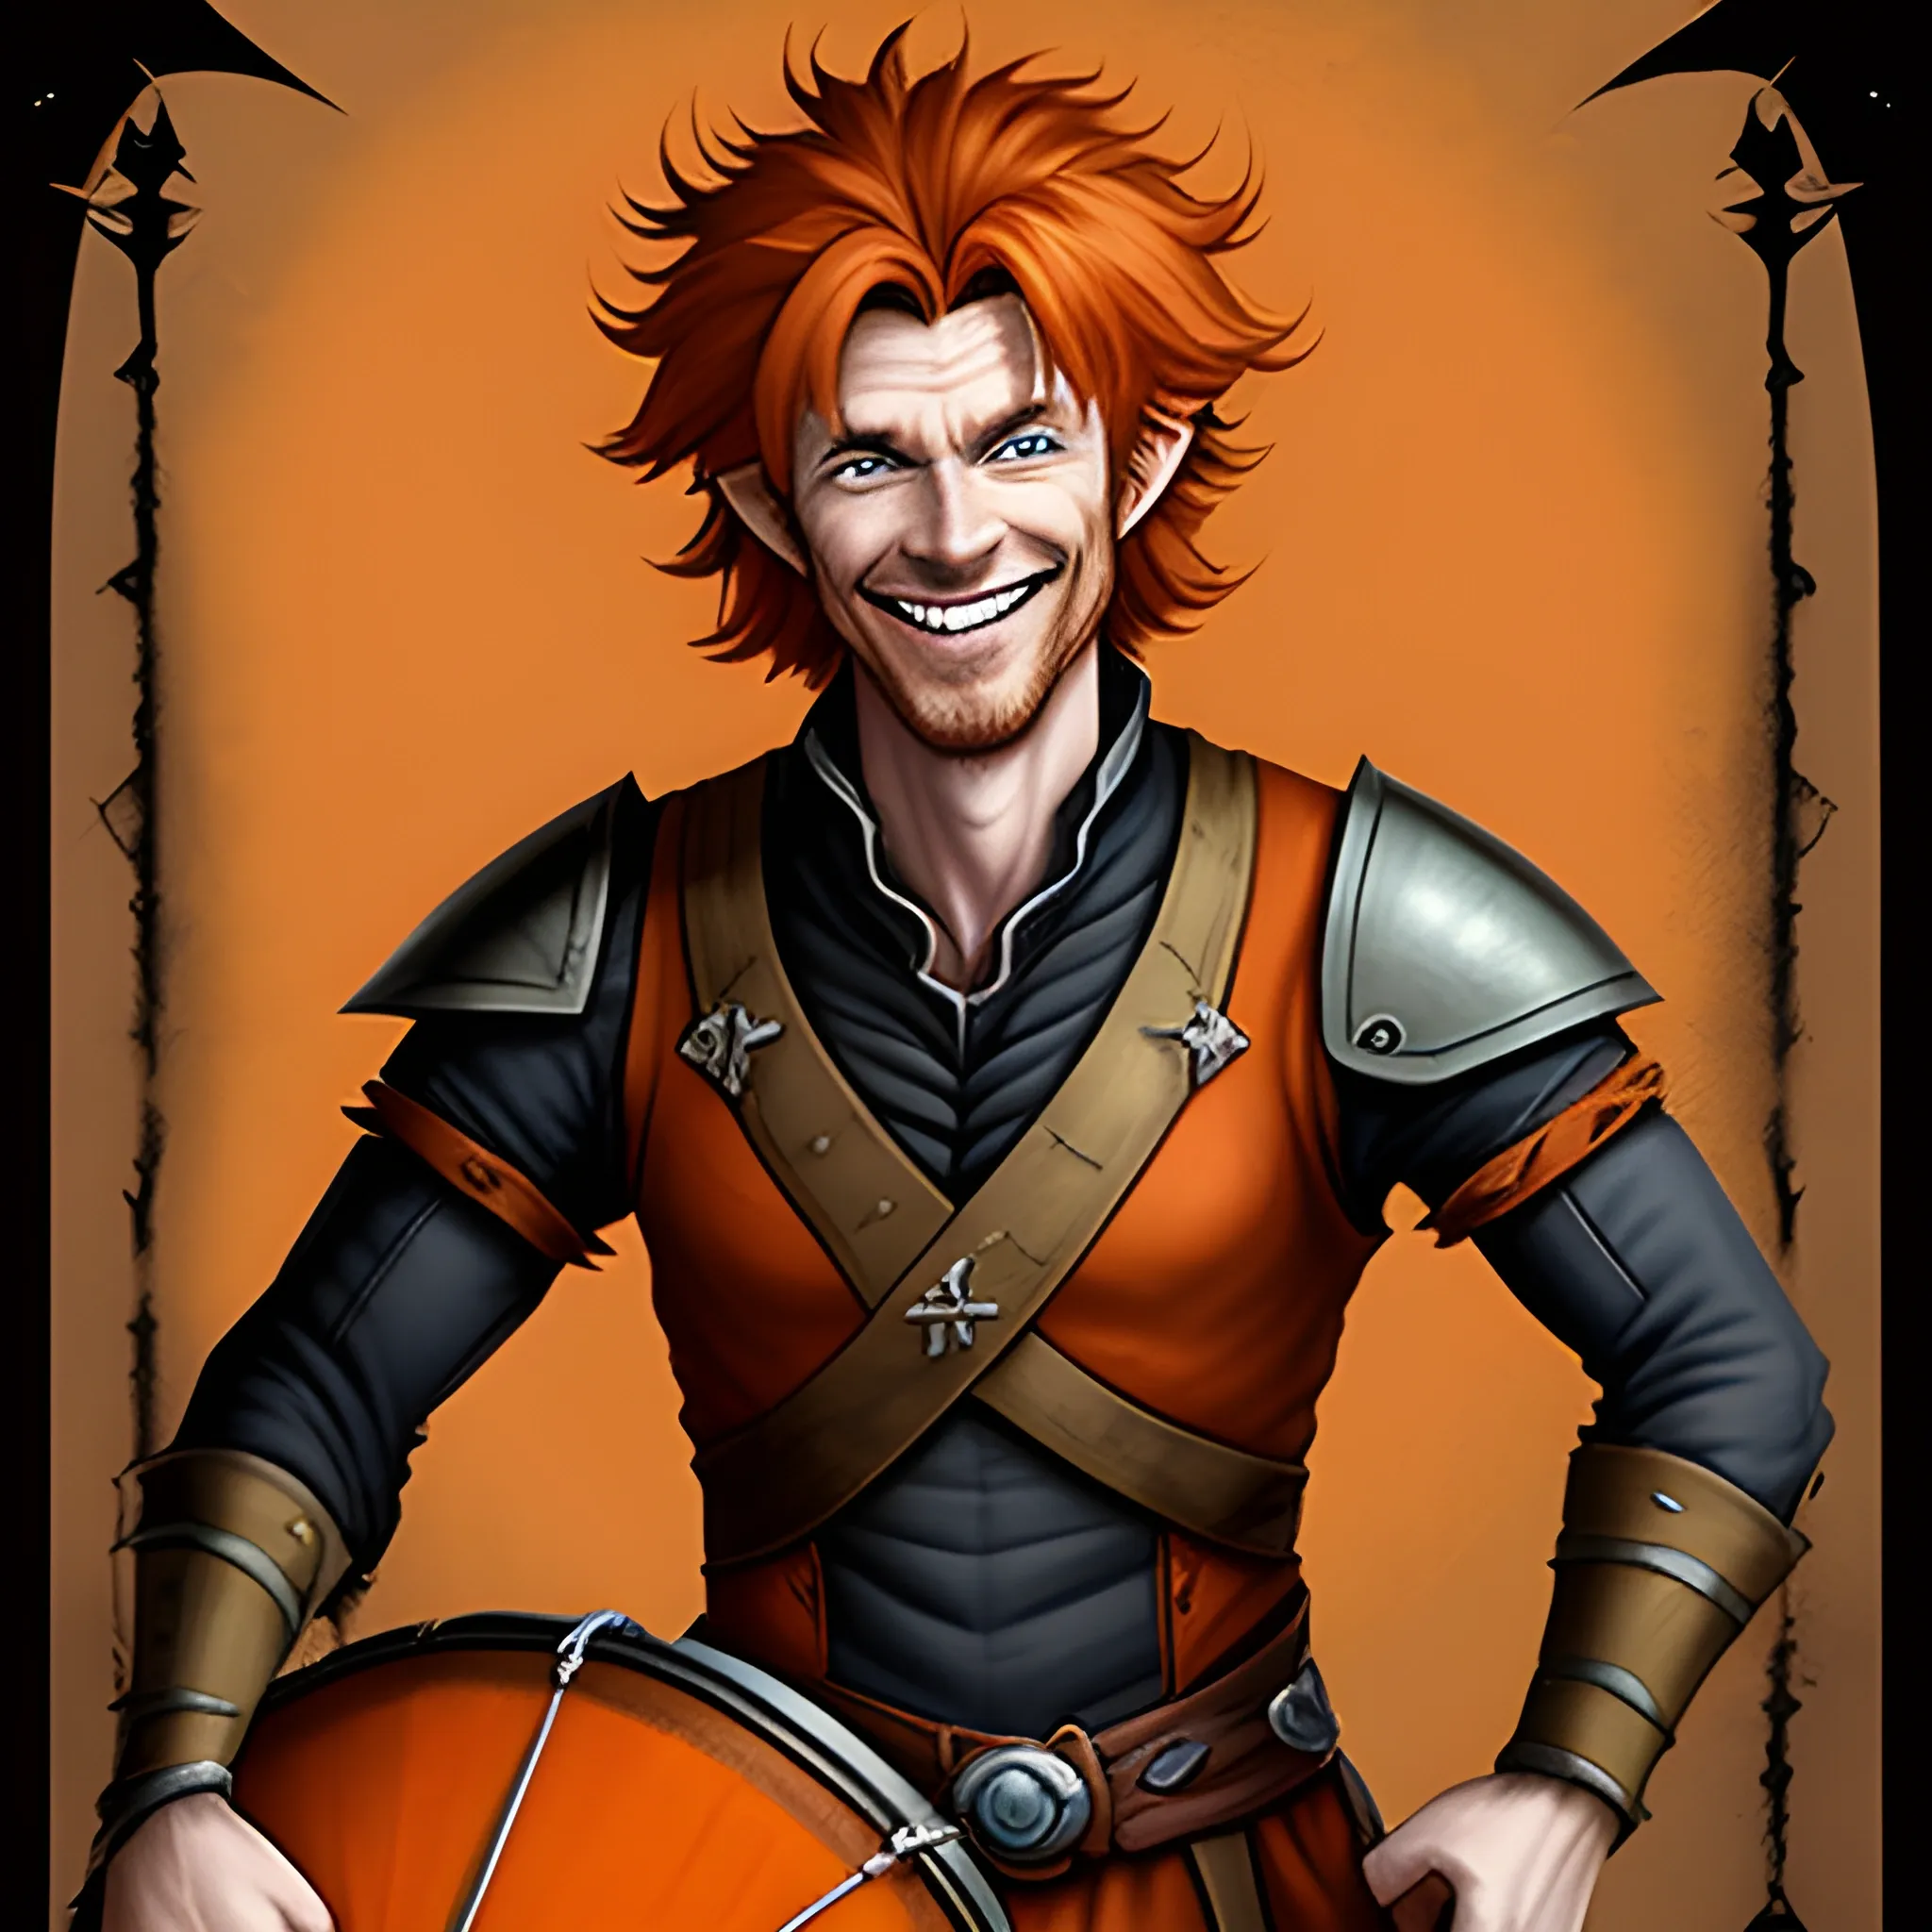 DnD fantasy frail skinny baby face tennage halfling male short haired dark orange ginger smiling with a mugshot expression and playing a drum